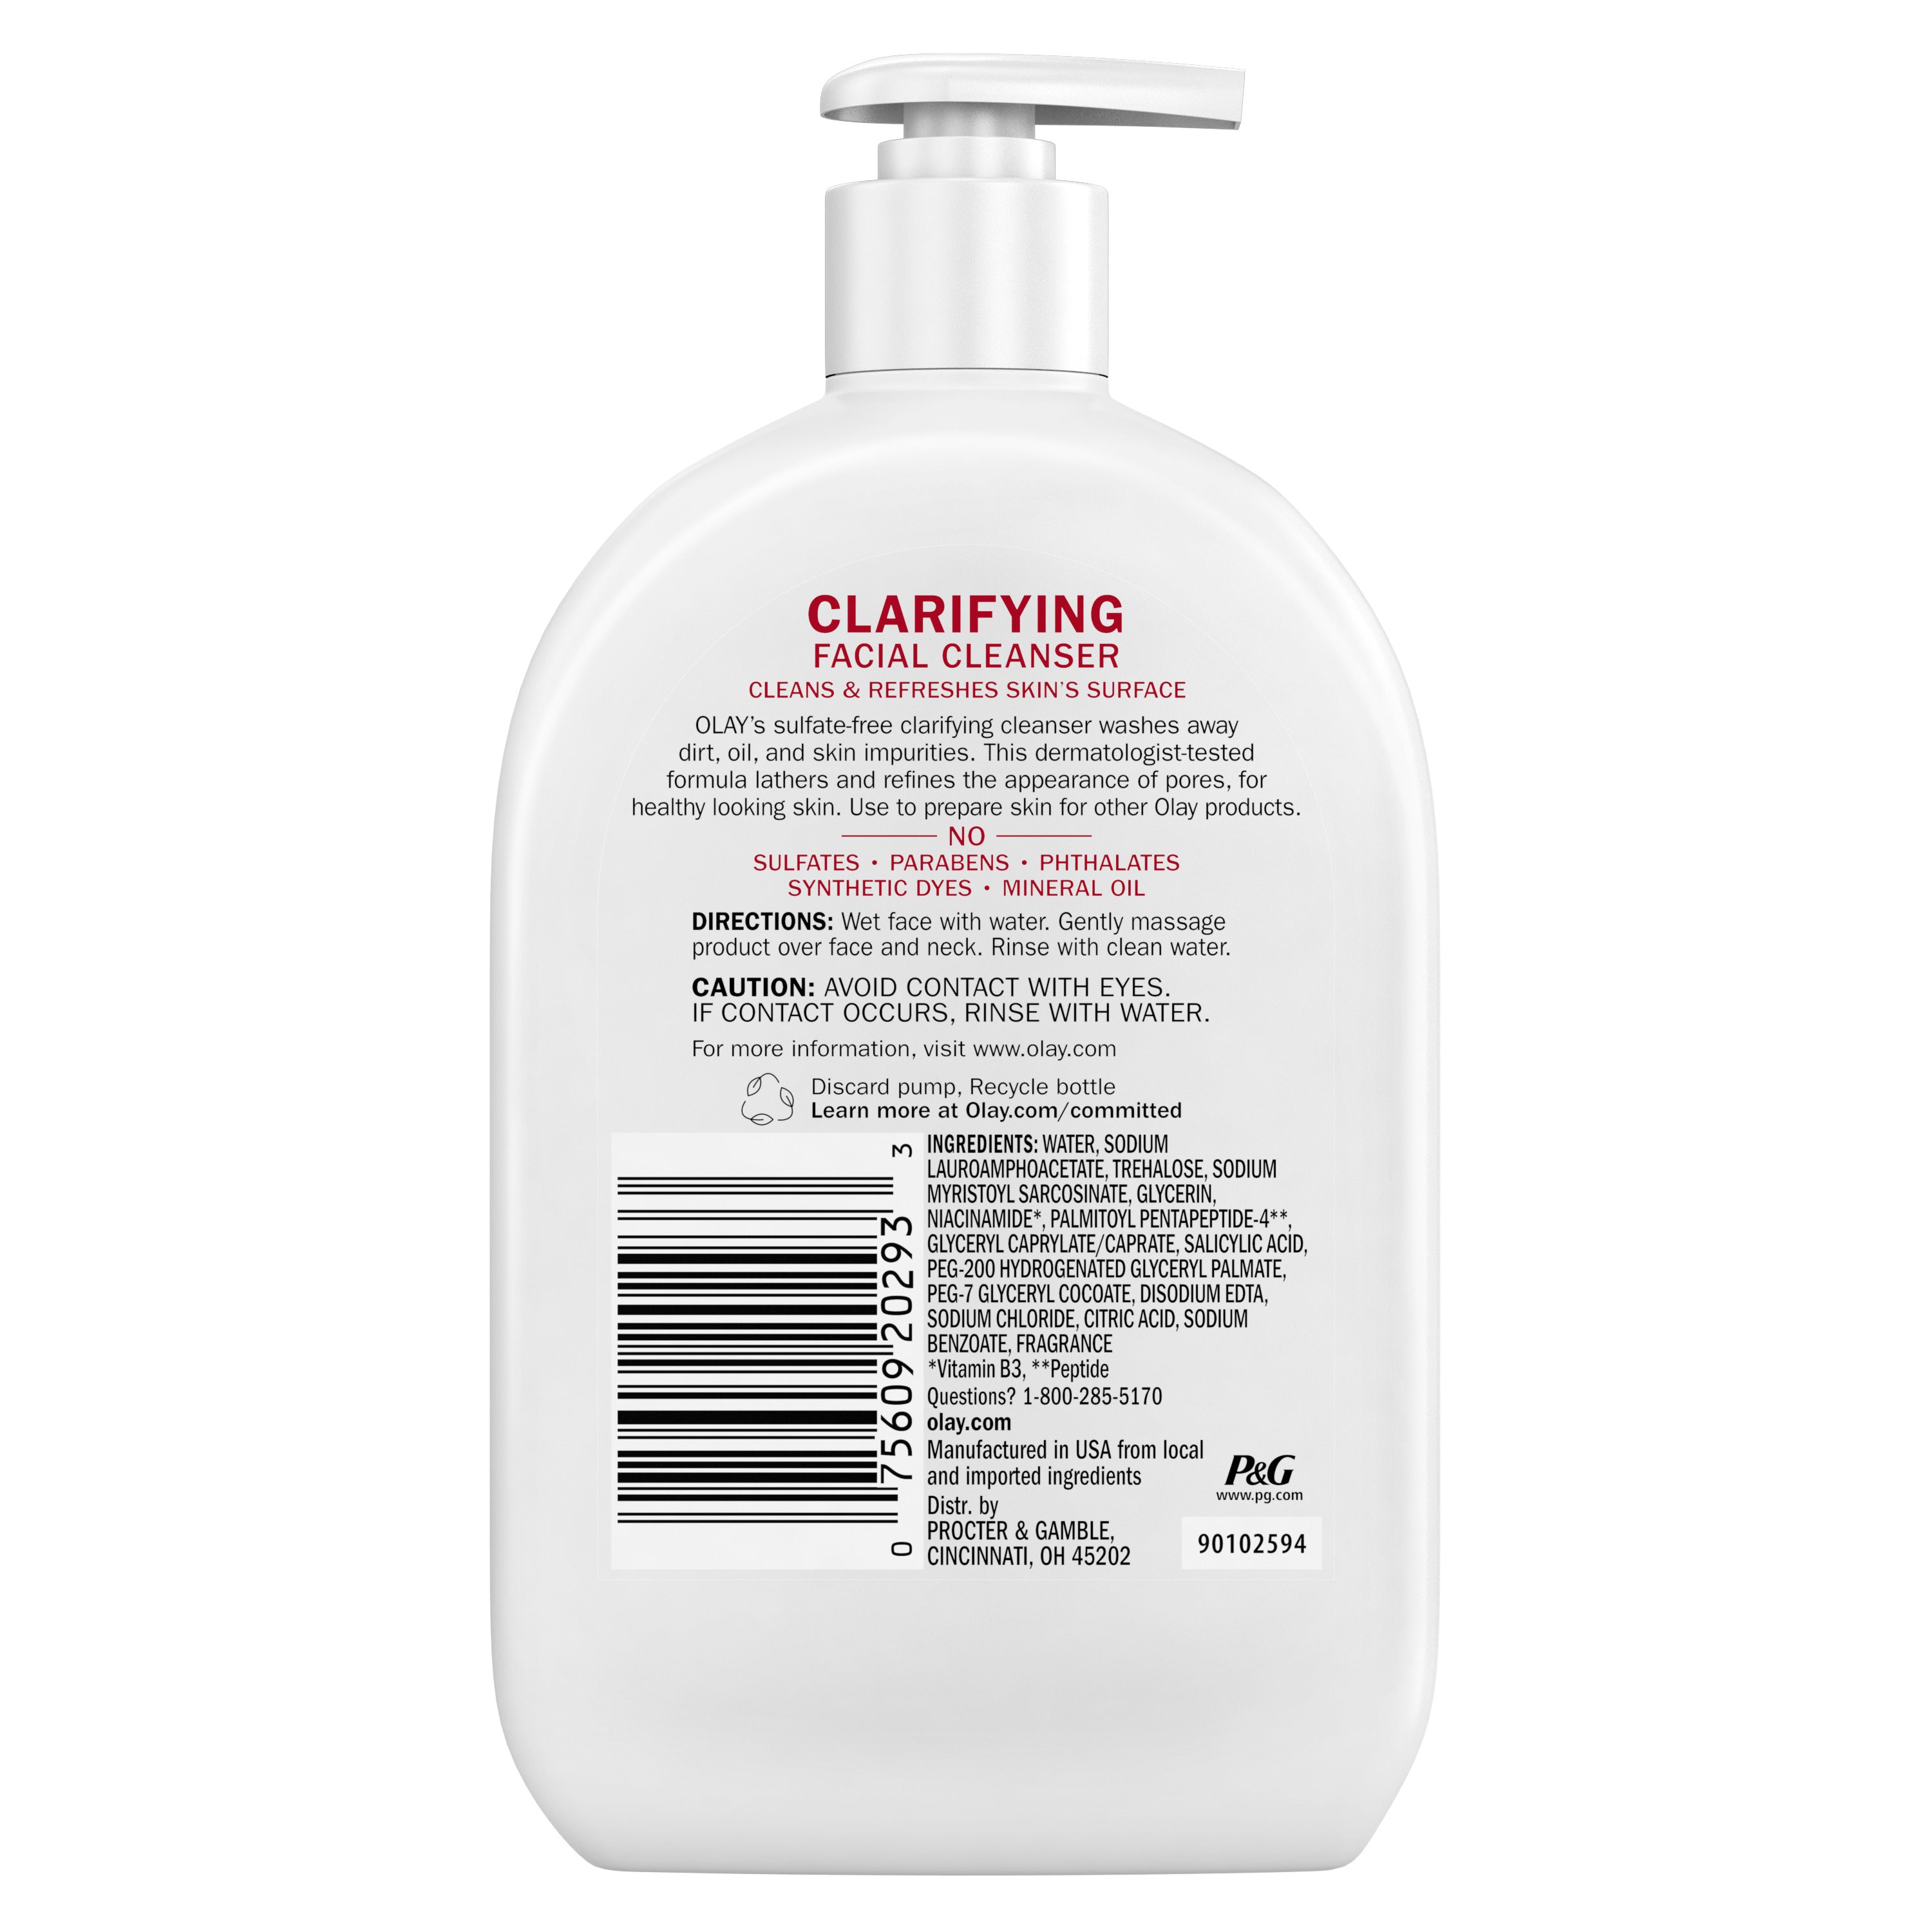 Olay Clarifying Face Wash, Facial Cleanser with Niacinamide, Fights Dryness in All Skin Types, 16 fl oz | MTTS330